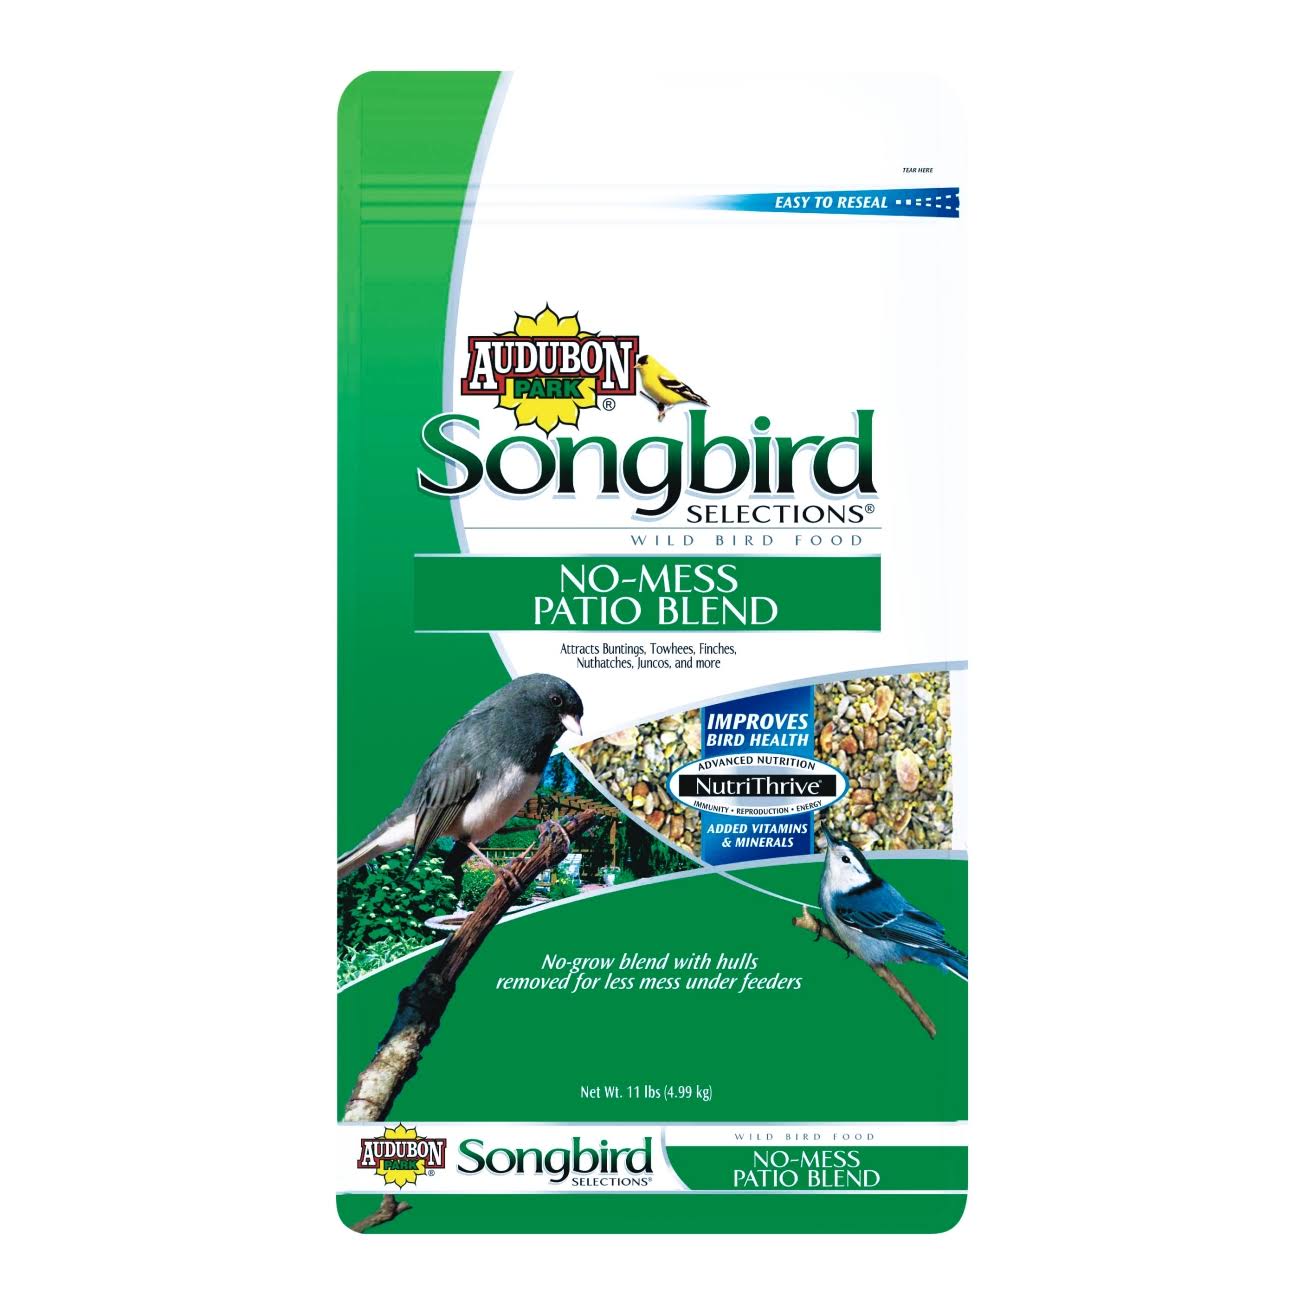 Scotts Songbird Selections No-Mess Patio Blend